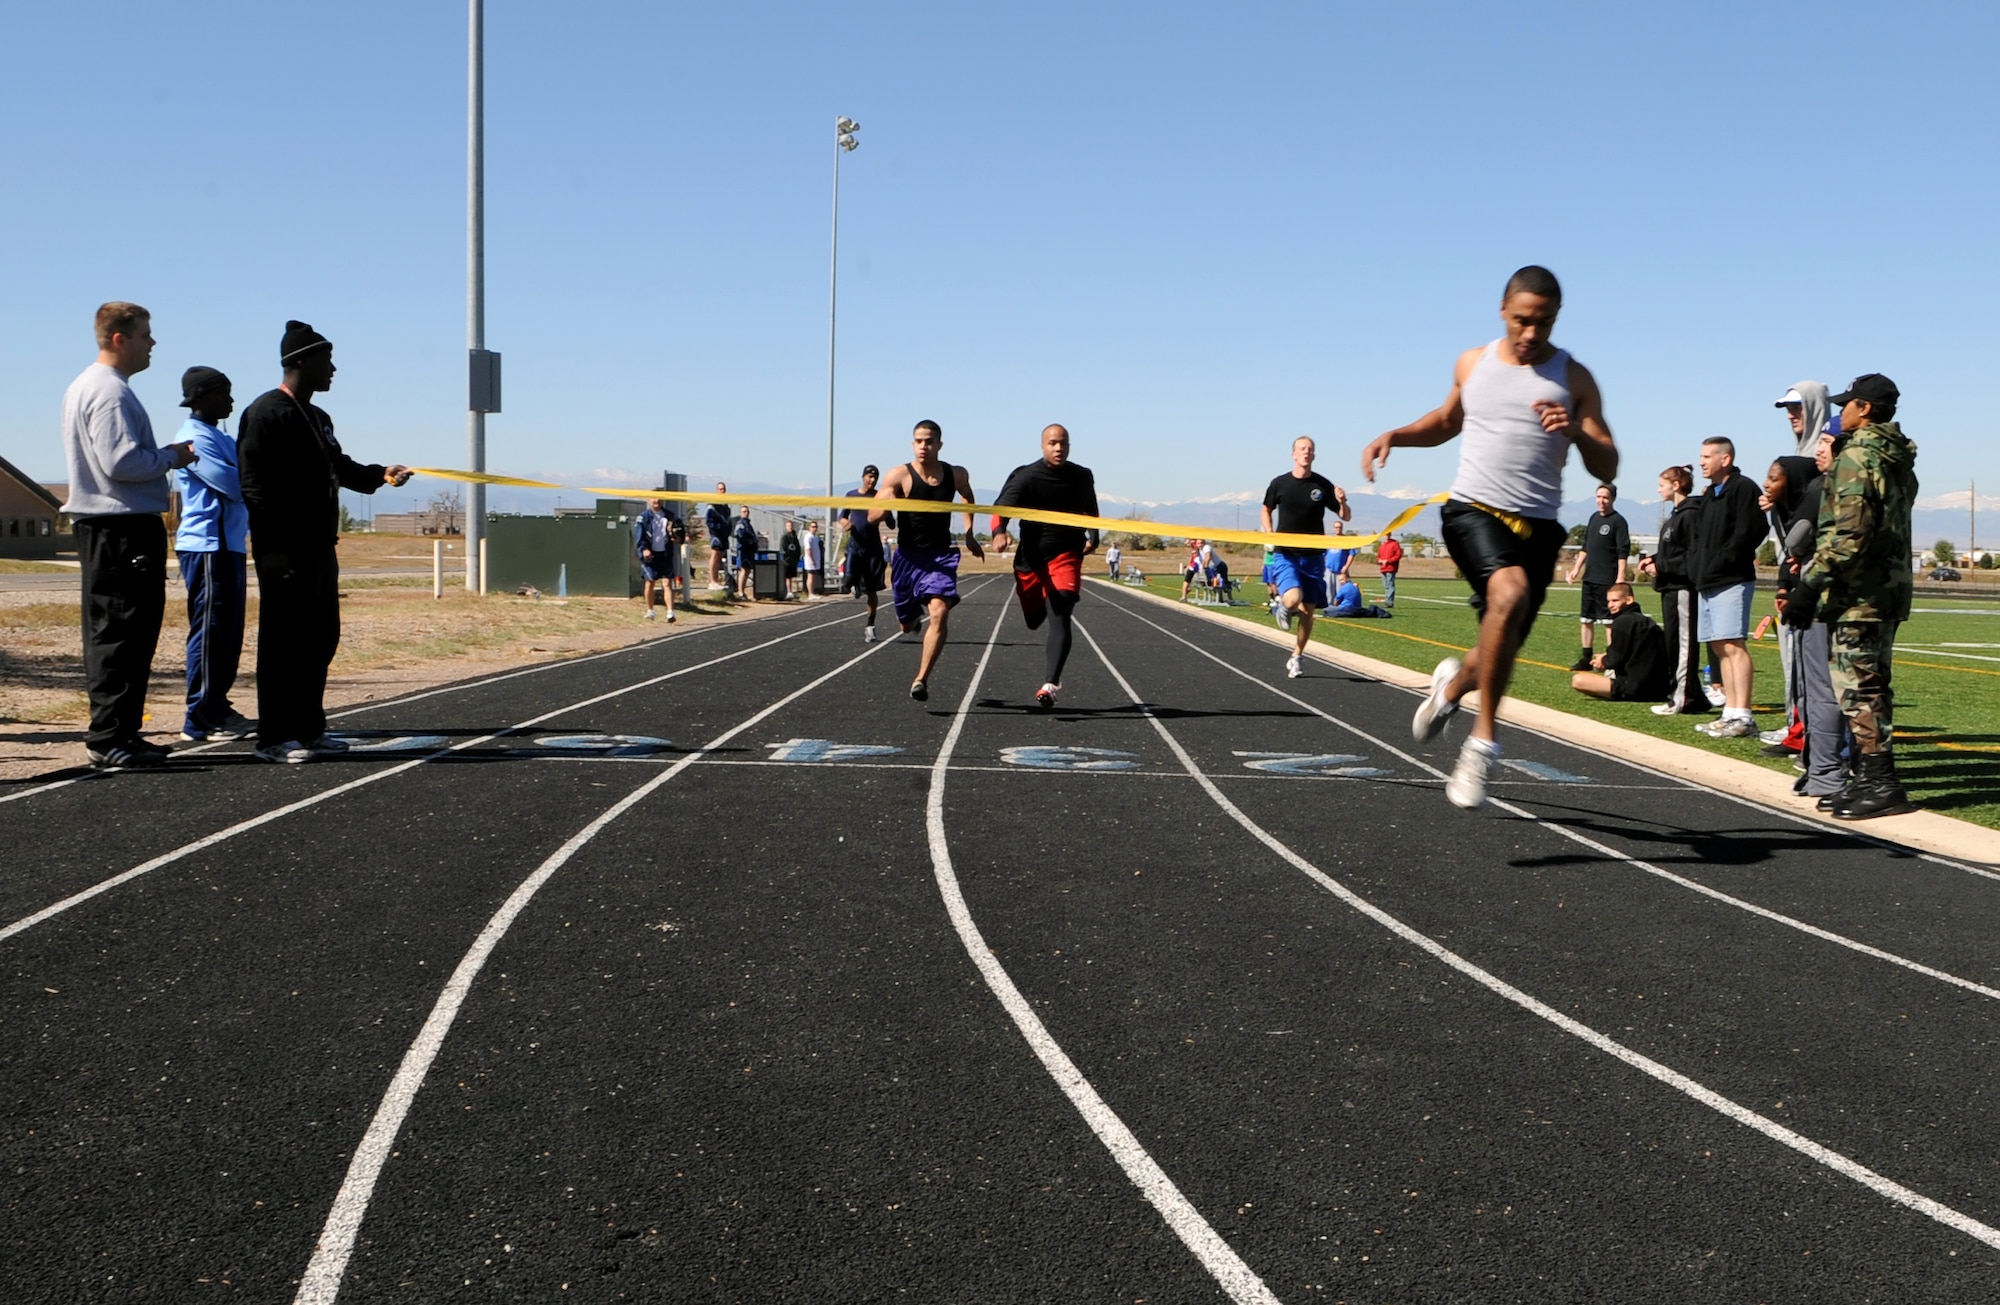 Buckley Air Force Base, Colo. – Anthony Simmons, 566 Intelligence Squadron, wins the 100-yard dash during Buckley's Sports and Field Day Oct. 2. Simmons won with a time of 11.79 seconds. (U.S. Air Force photo by Senior Airman Erika Brooke)